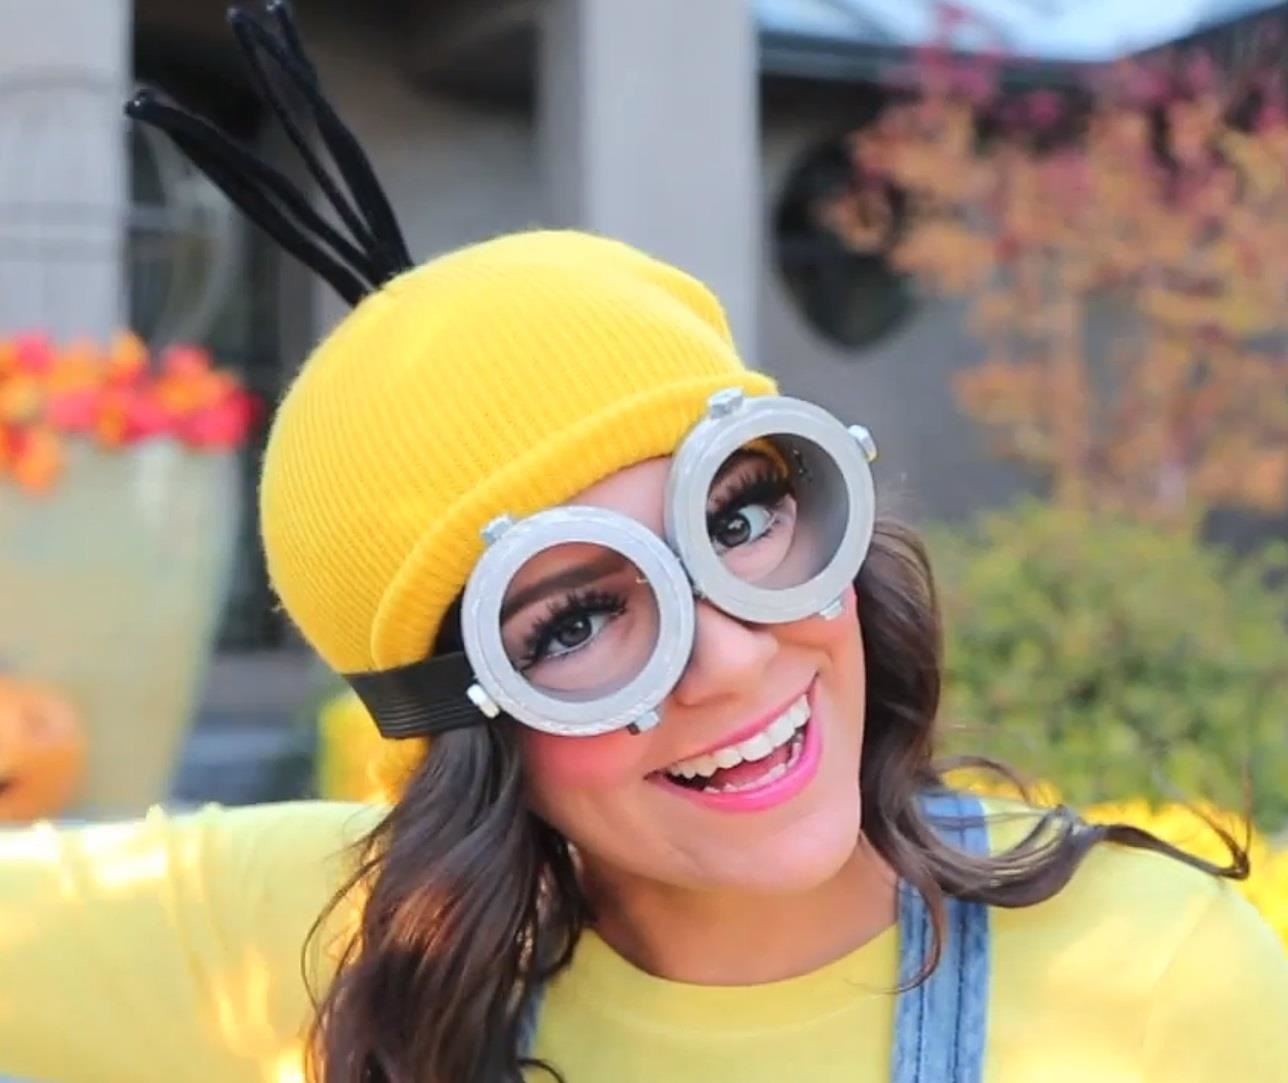 Bee-Do, Bee-Do! 5 Awesome DIY Minion Halloween Costumes from 'Despicable Me'